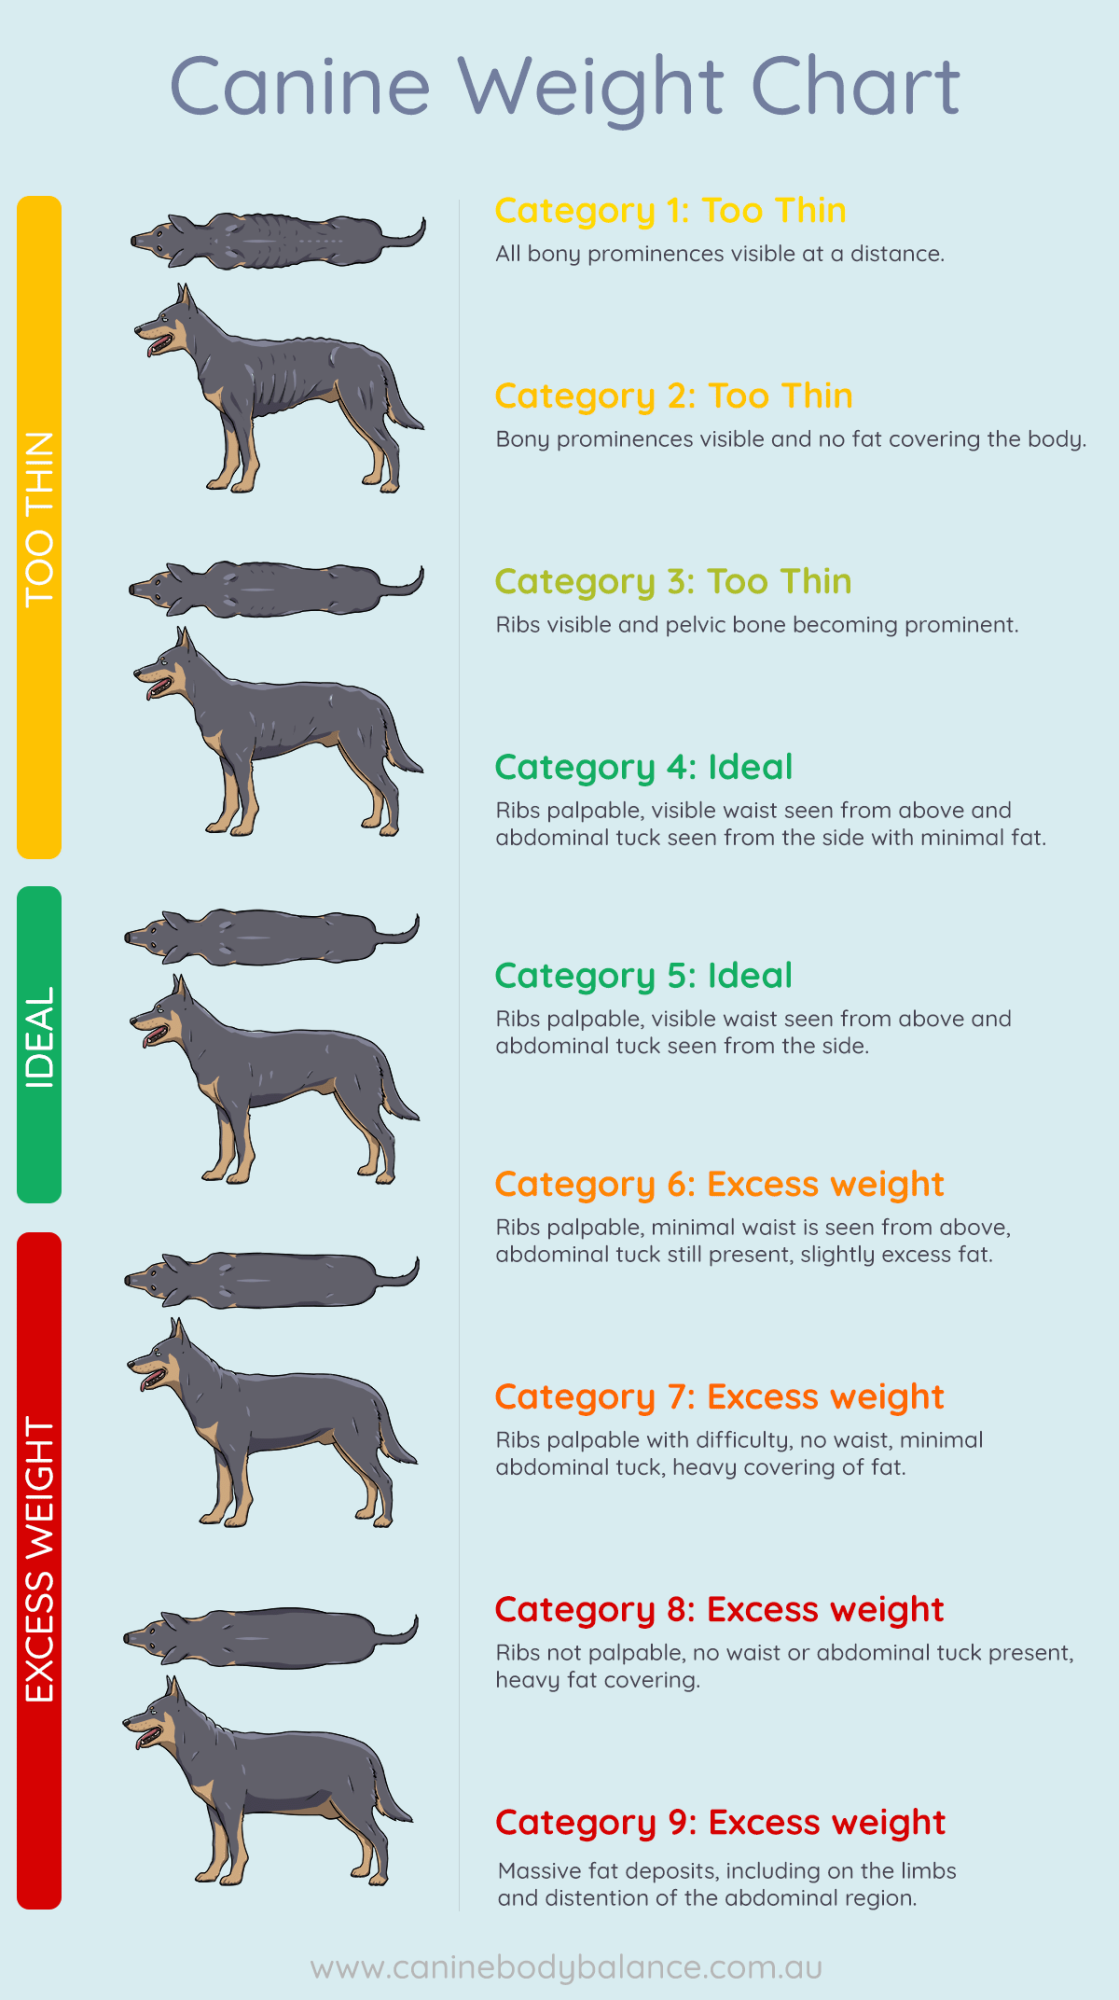 https://caninebodybalance.com.au/canine/media/pages/journal/is-my-dog-over-weight/0f5e264752-1694559870/dog-weight-chart.png